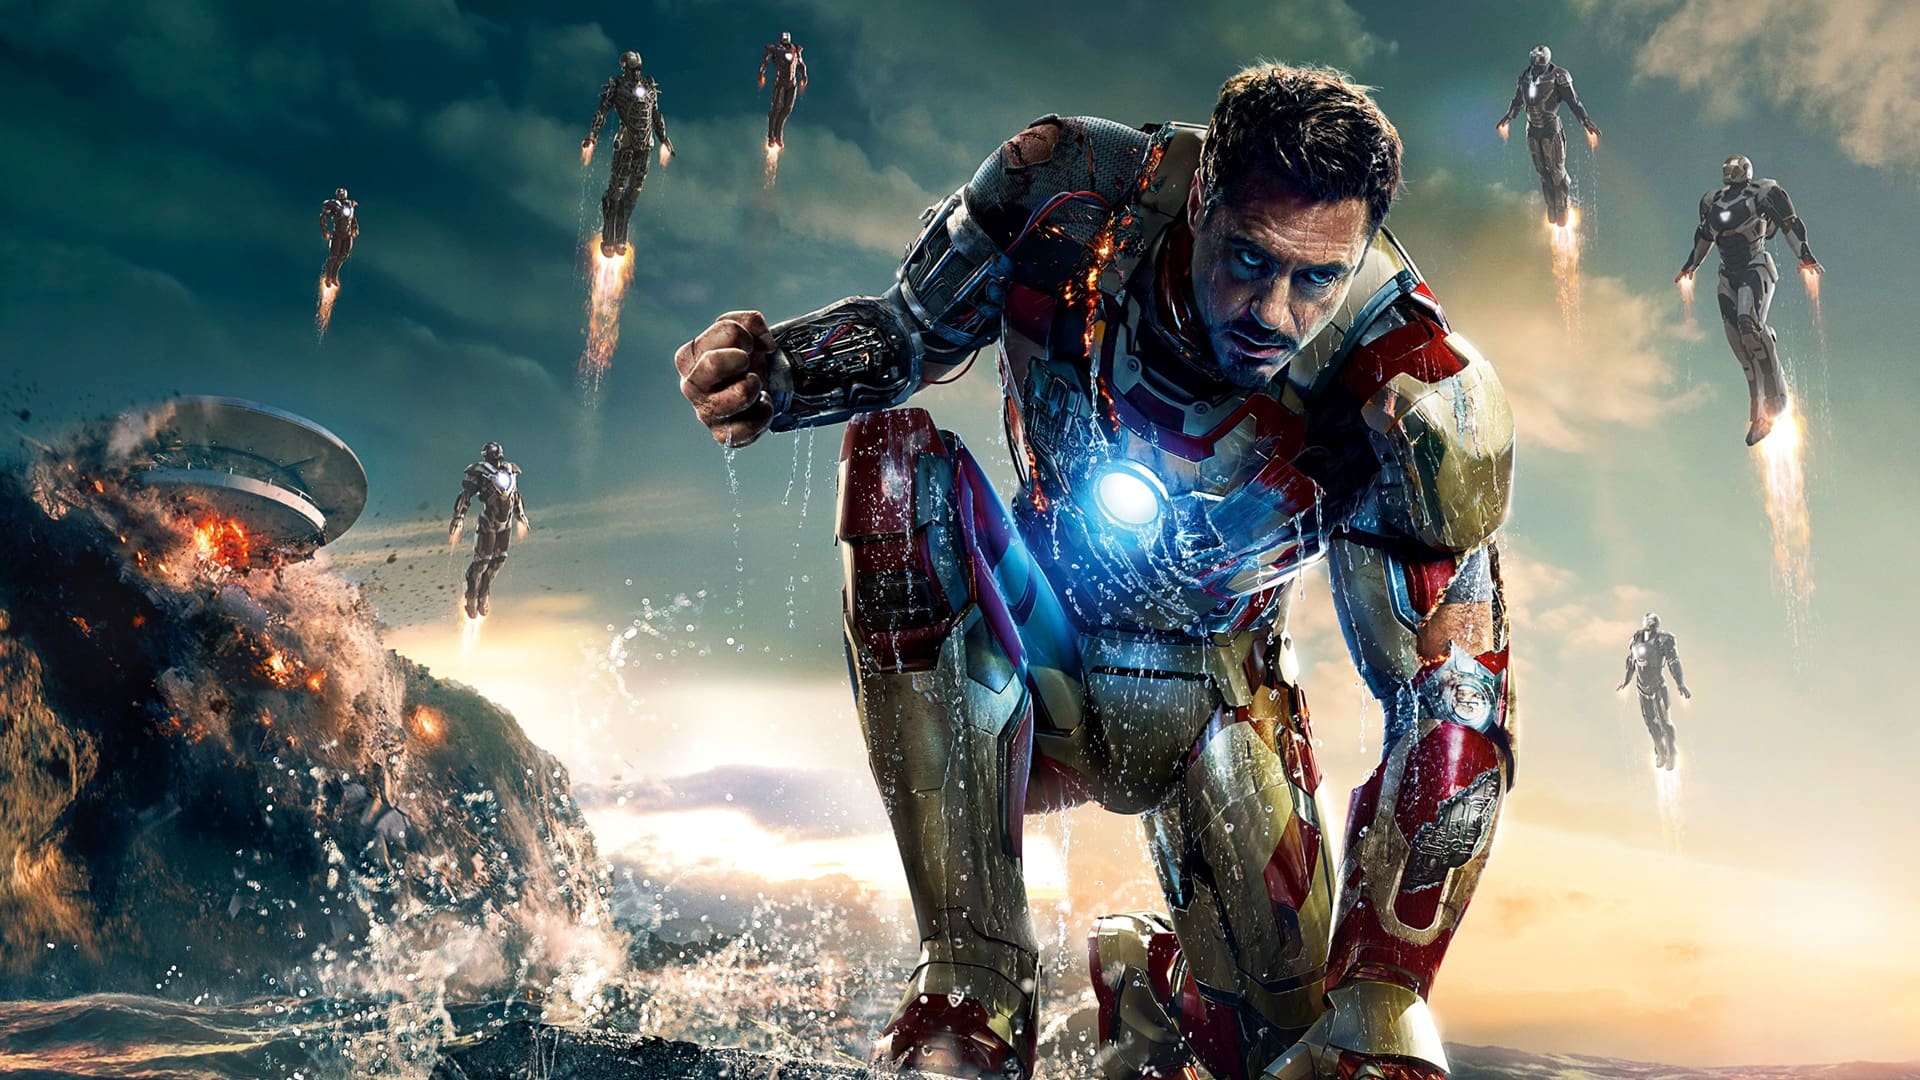 Iron Man 3 (2013) Hindi Dubbed Free Movies watch and Download - Hdmovie2